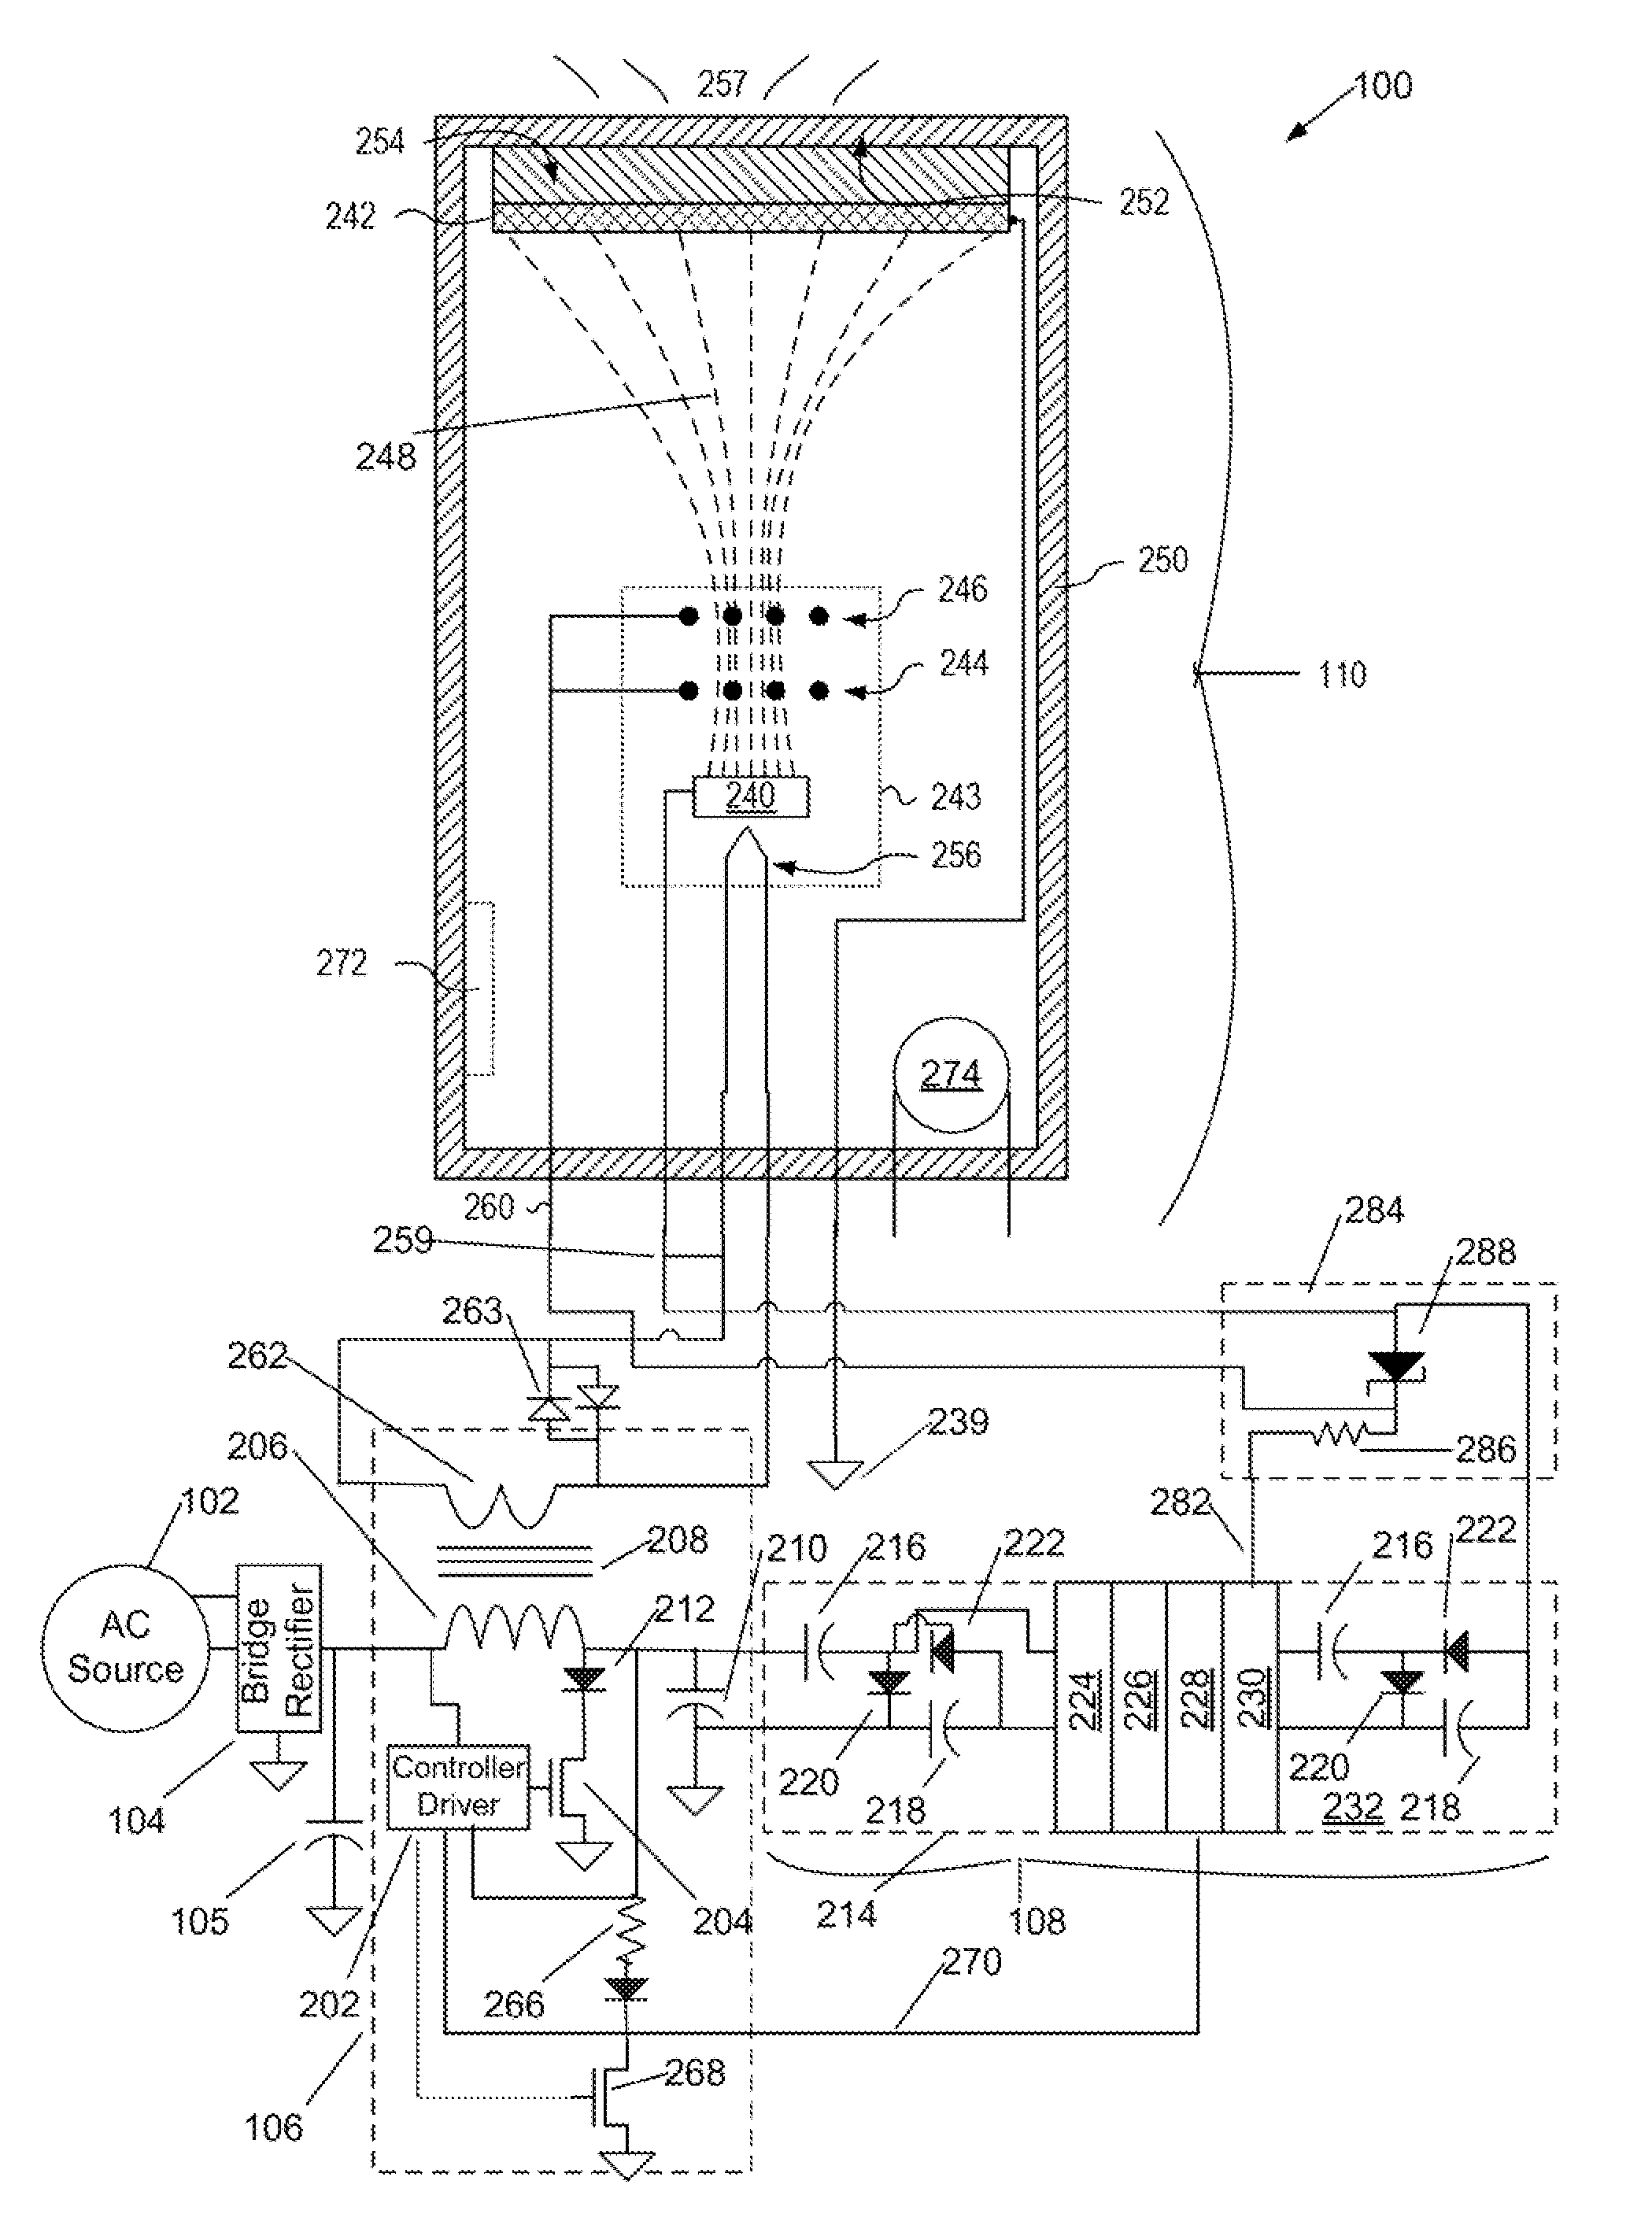 System and apparatus for cathodoluminescent lighting